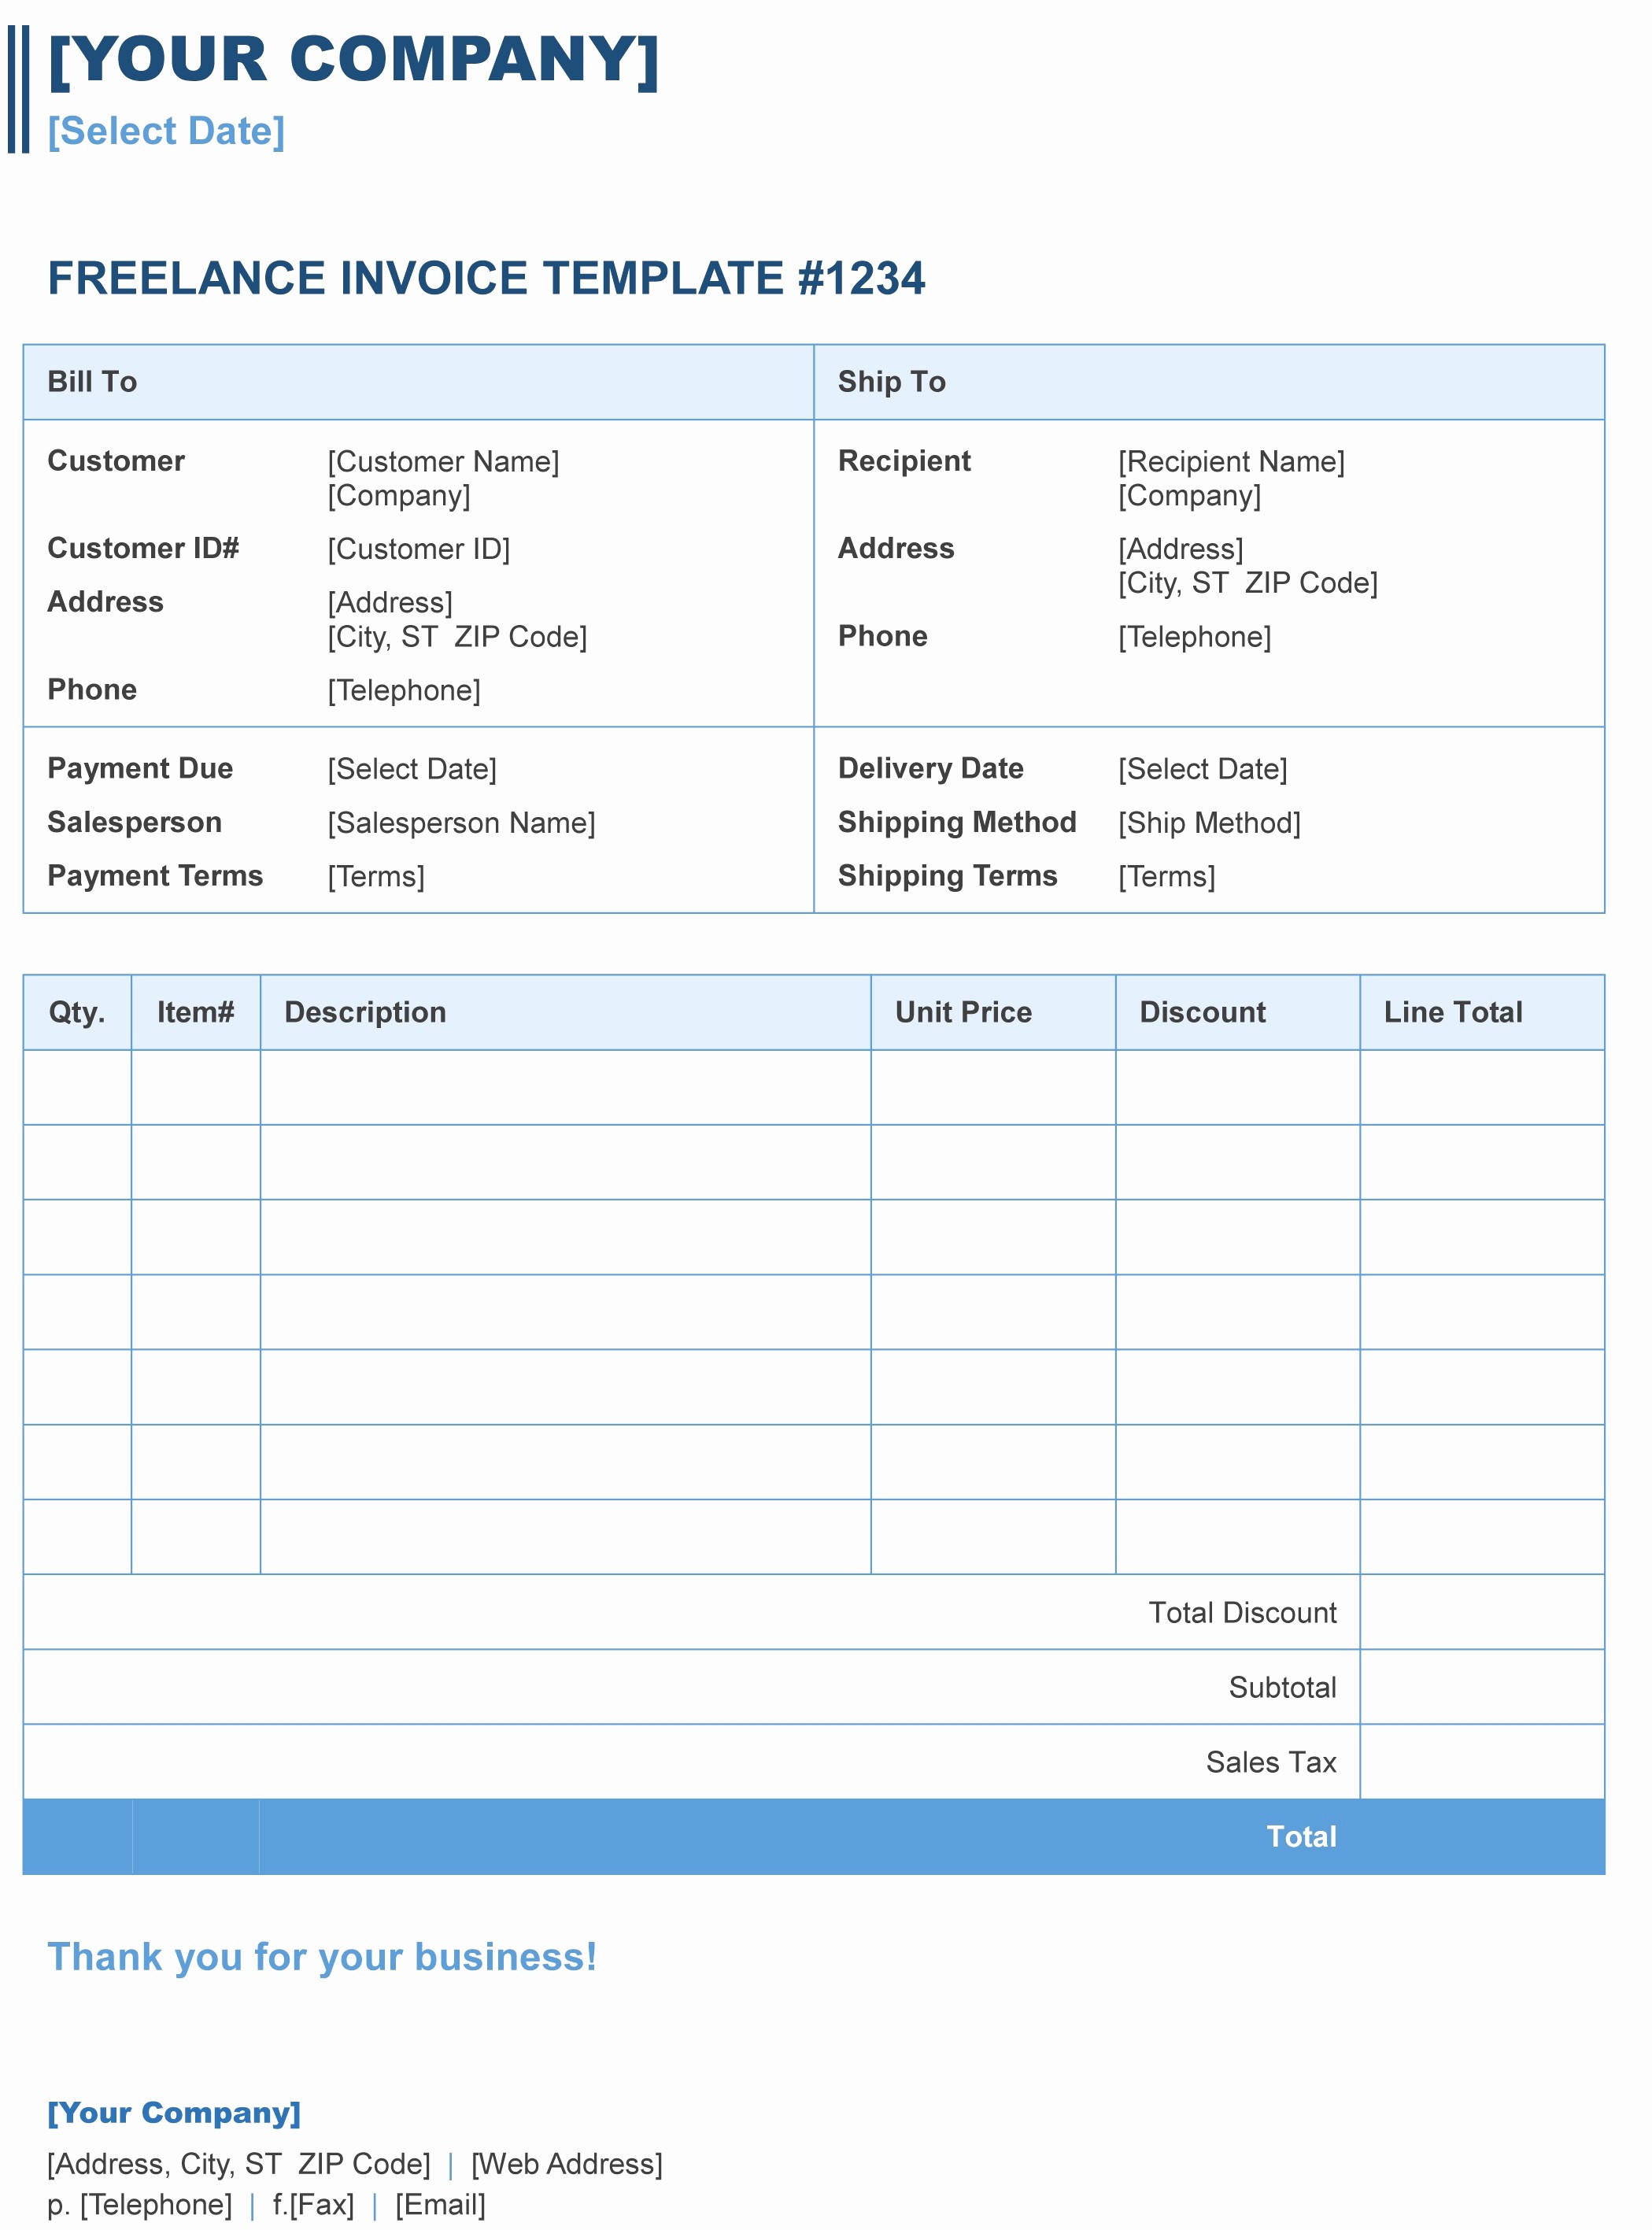 Microsoft Word Invoice Templates Free Beautiful Freelance Invoice Template Excel